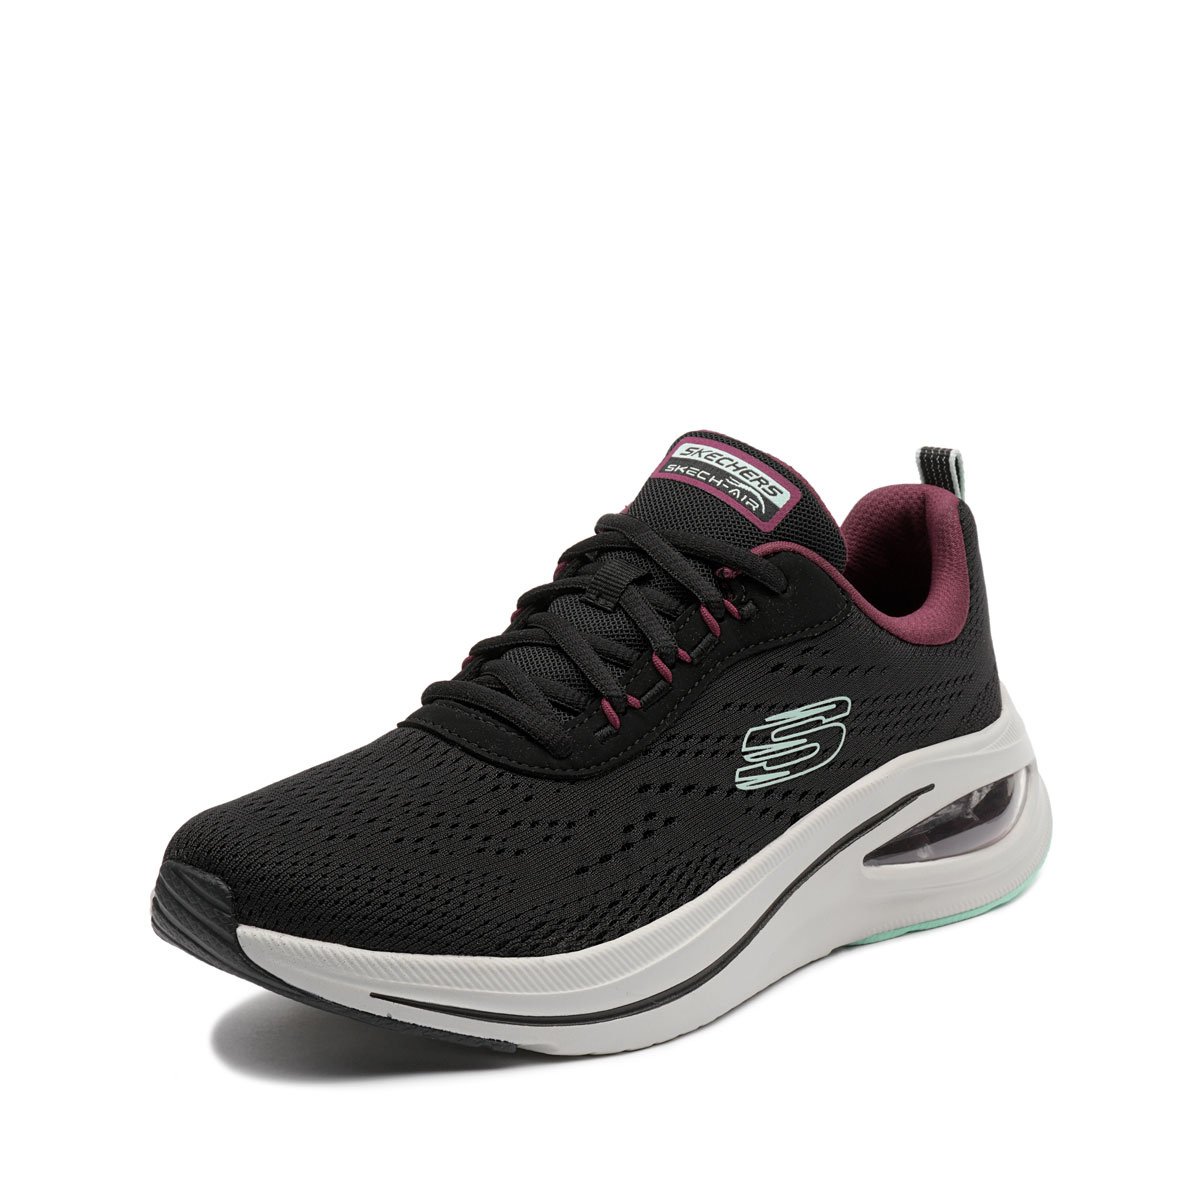 Skechers Skech-Air Meta-Aired Out Дамски маратонки 150131-BKMT